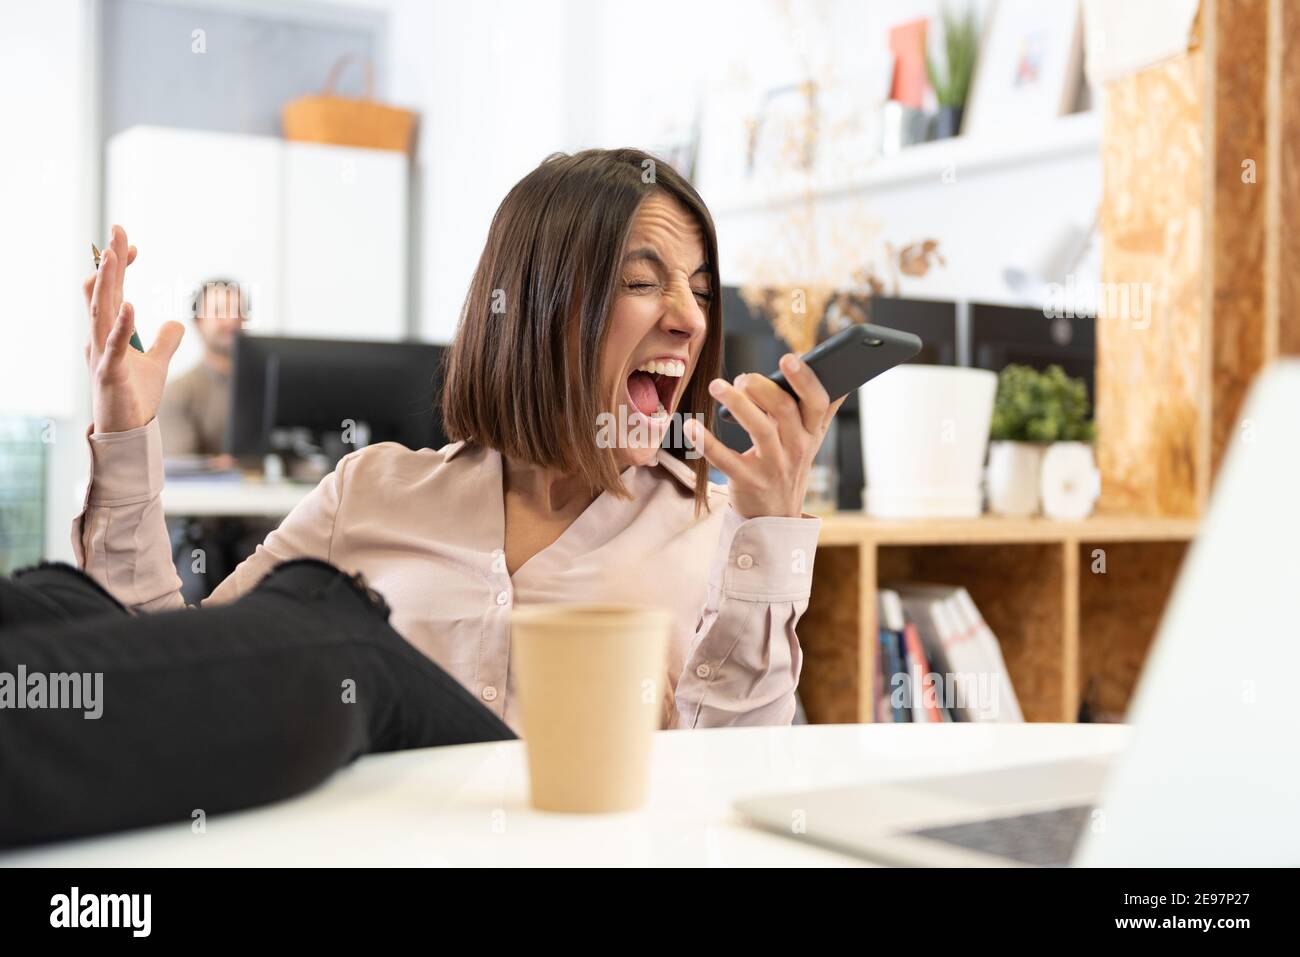 An angry hispanic woman whith her feet on desk yelling on the phone in the office. Stock Photo